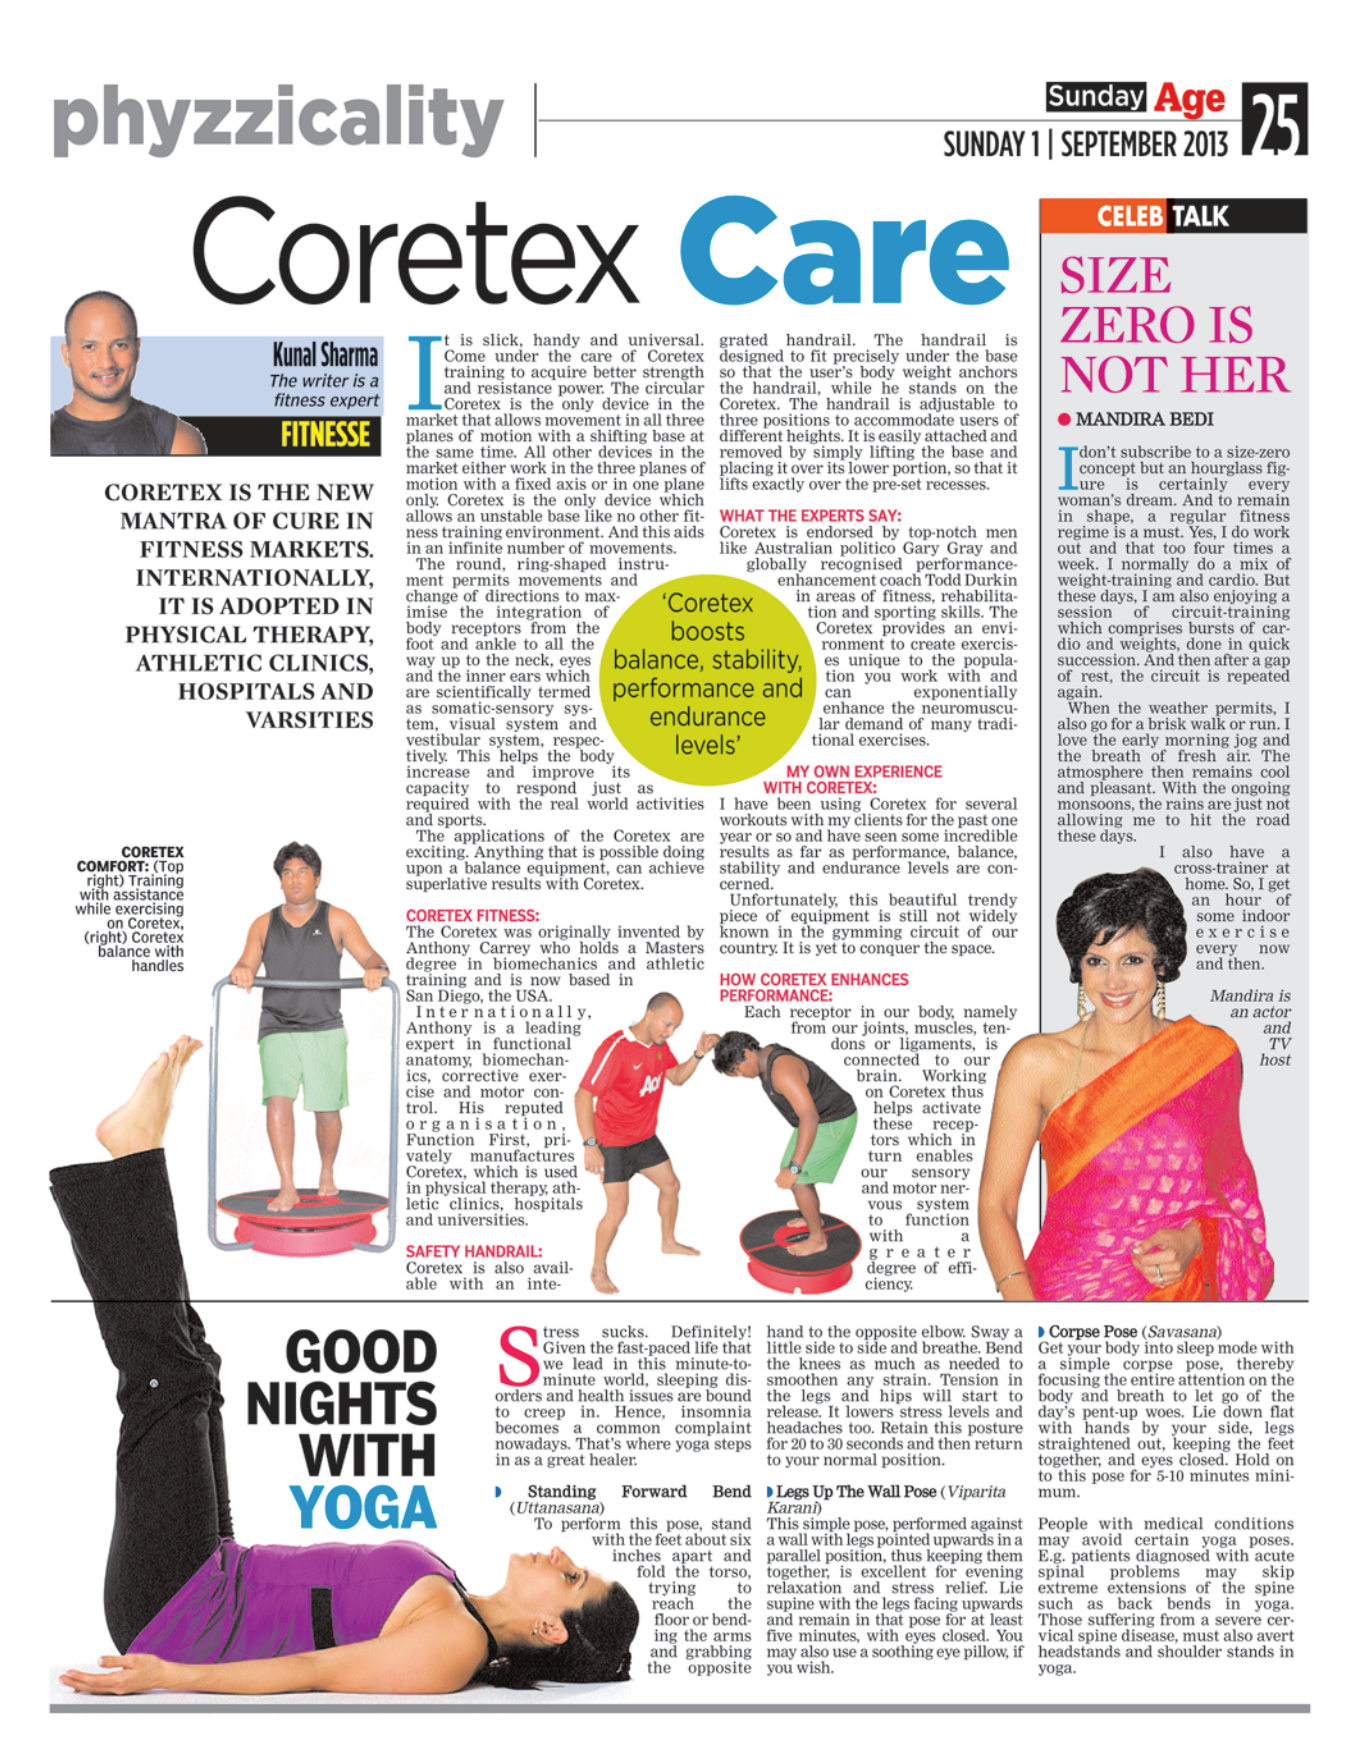 THE ASIAN AGE (INDIA), SEPTEMBER 1, 2013: Core-Tex Care